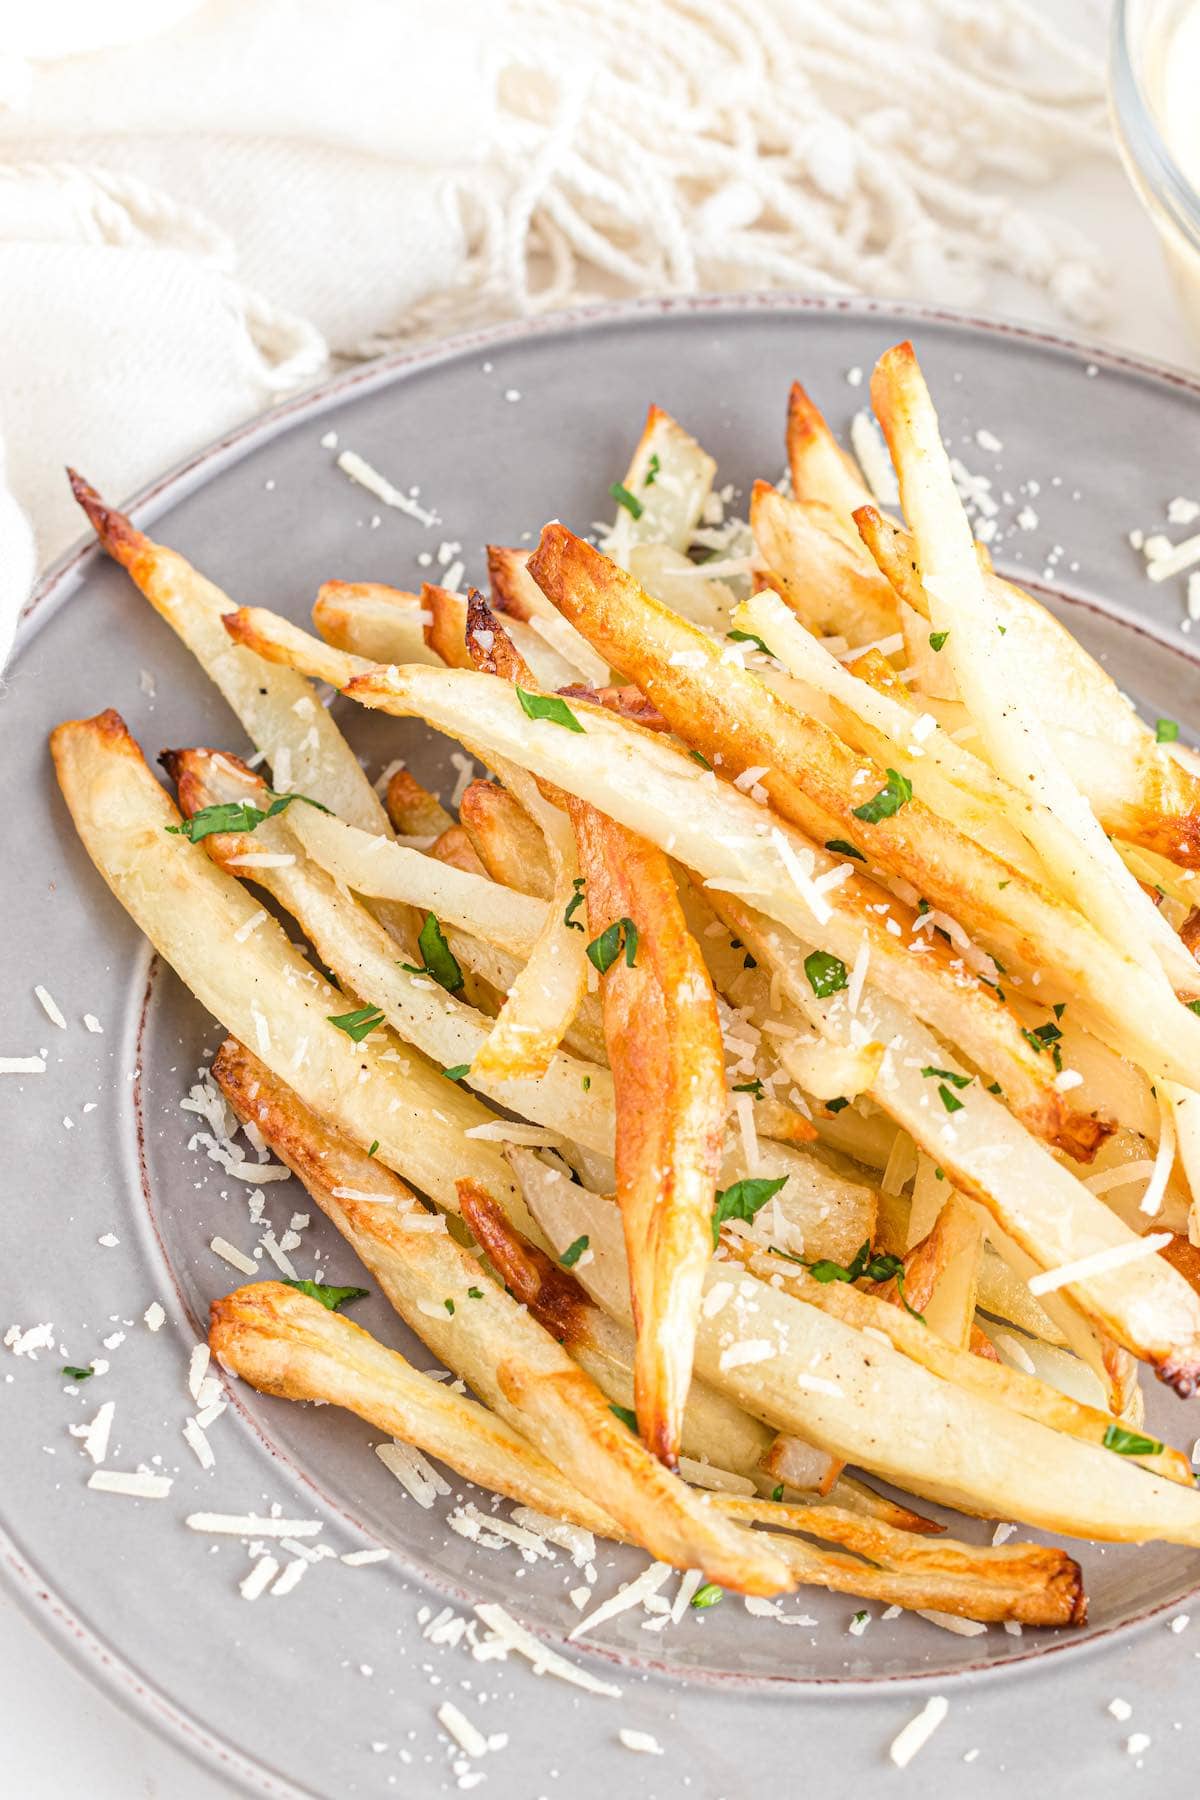 truffle fries on a plate.